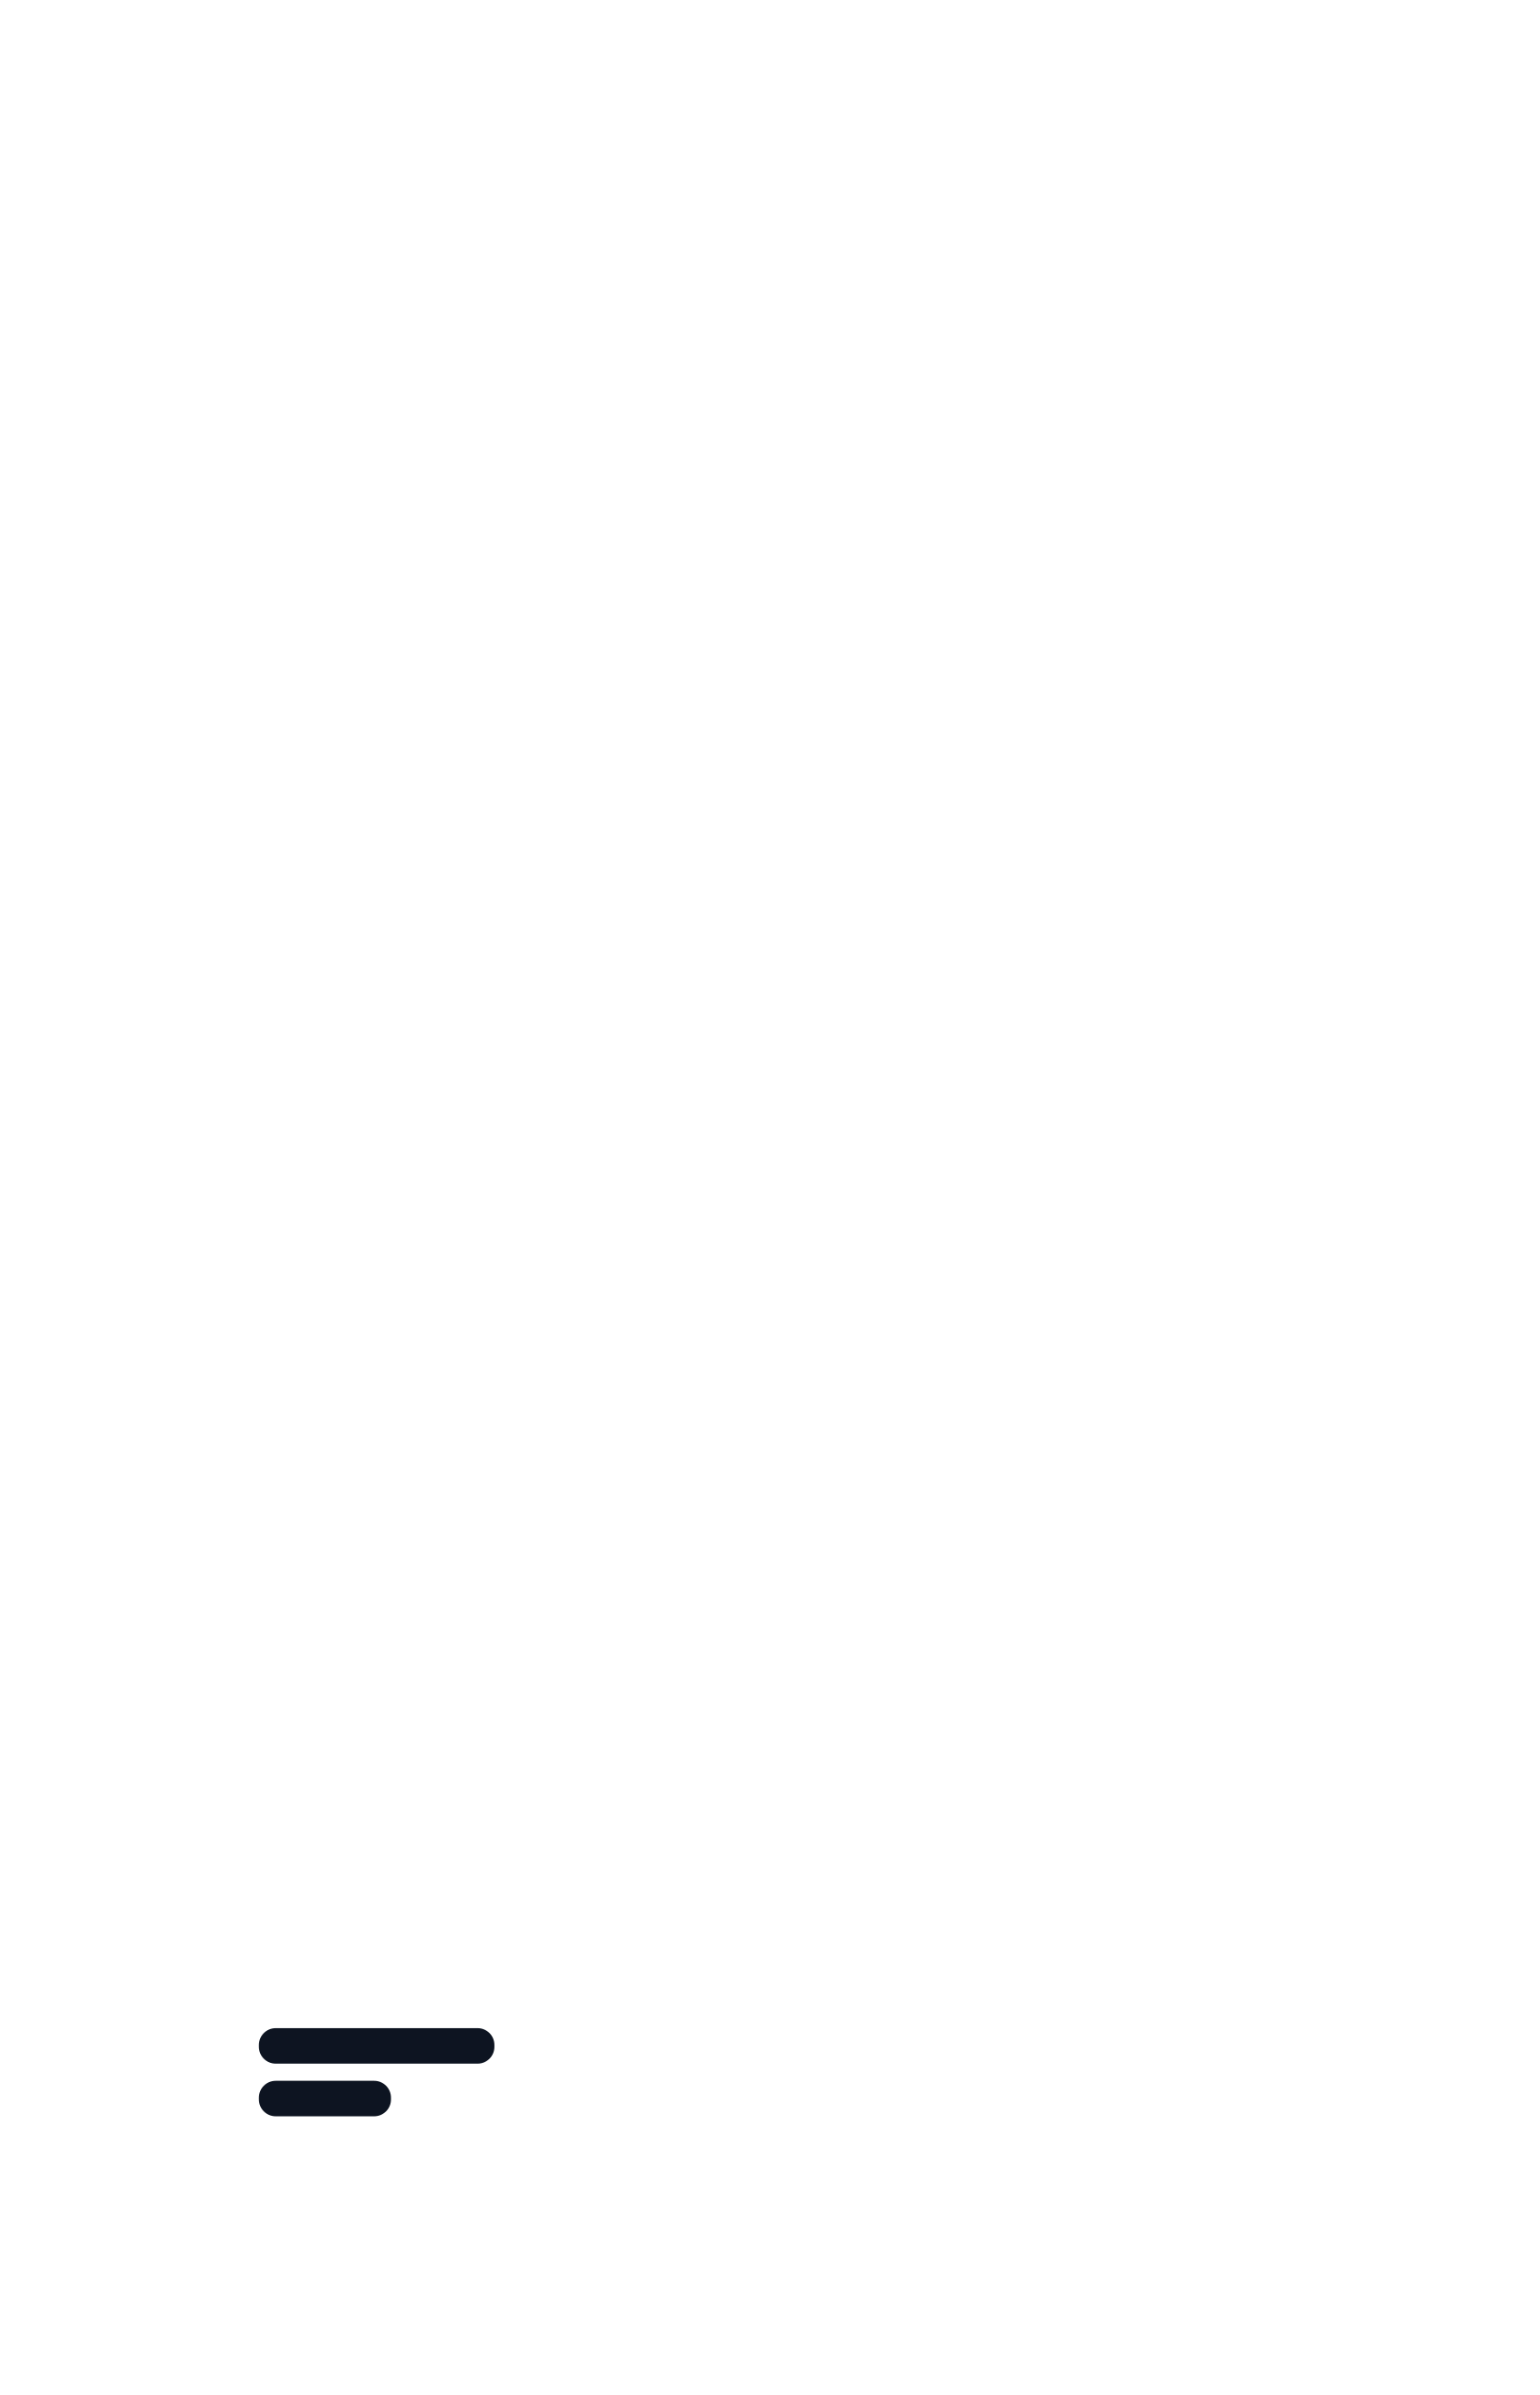 an illustration of the steps required to post a listing on CannaMLS: 1 - sign up on CannaMLS. 
                2 - fill in the listing form. 3 - wait for listing approval. 4 - your listing is live. 5 - receive inquiries from potential buyers.